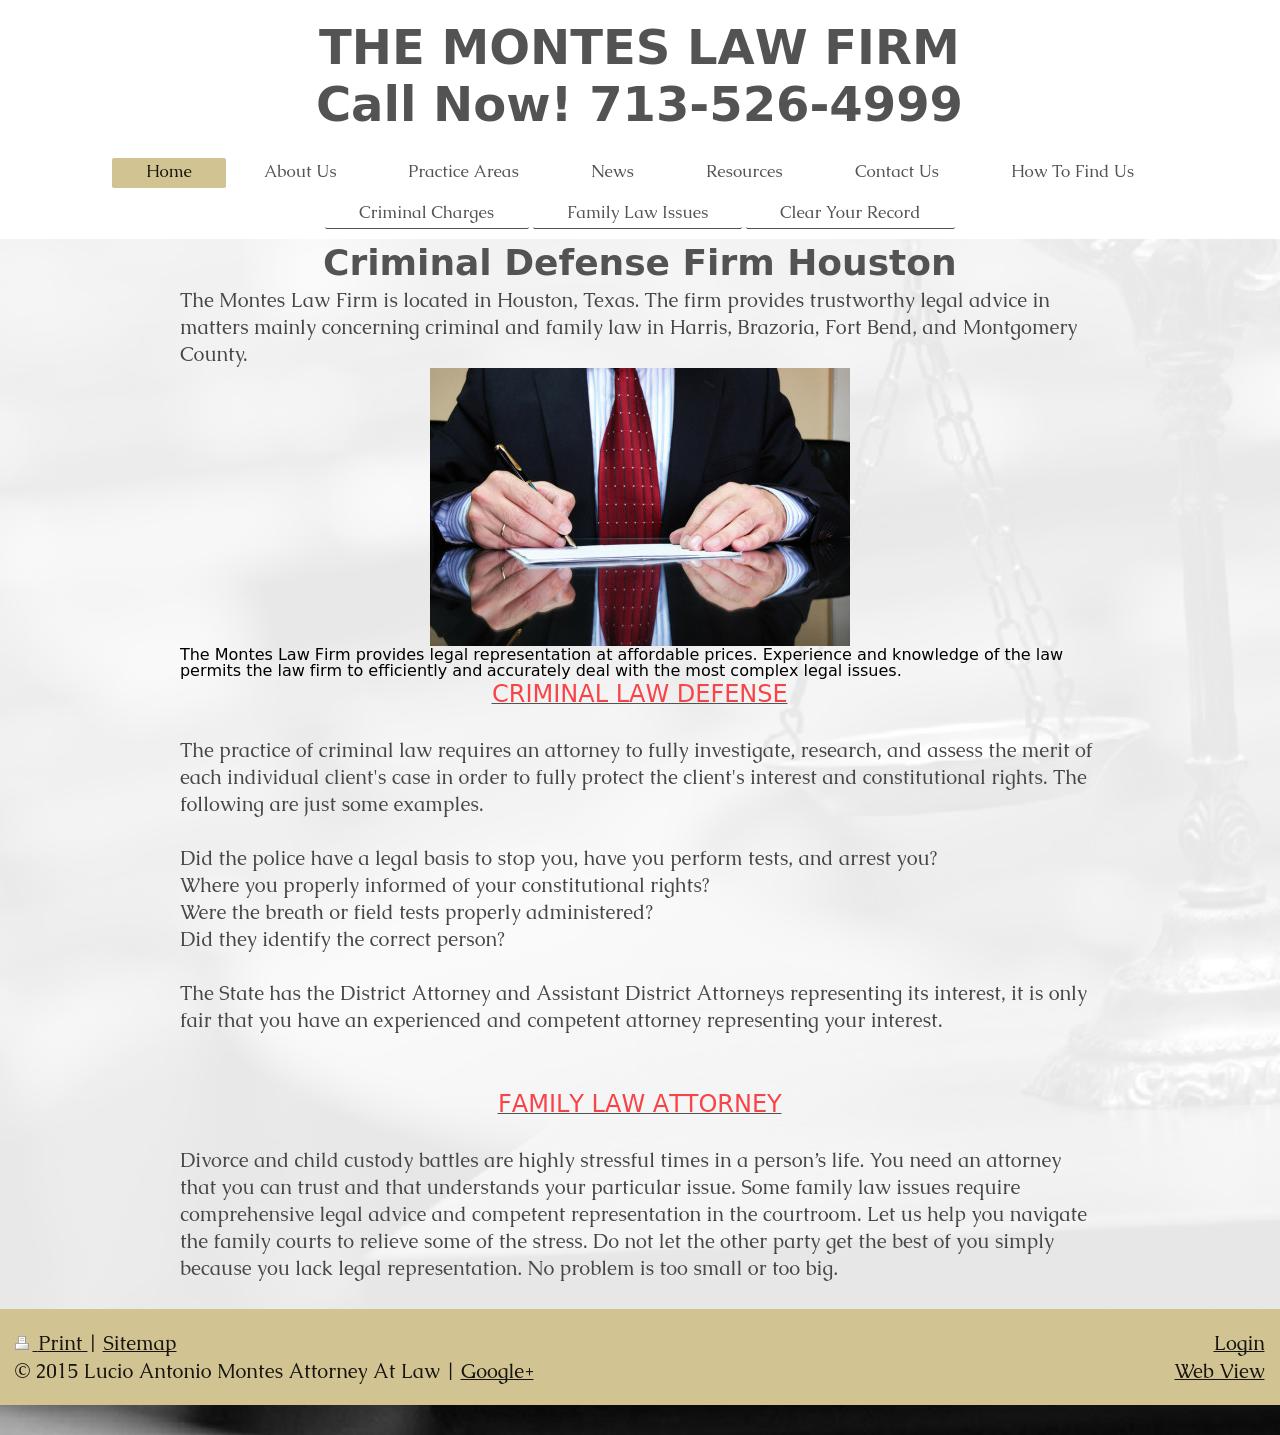 The Montes Law Firm - Houston TX Lawyers